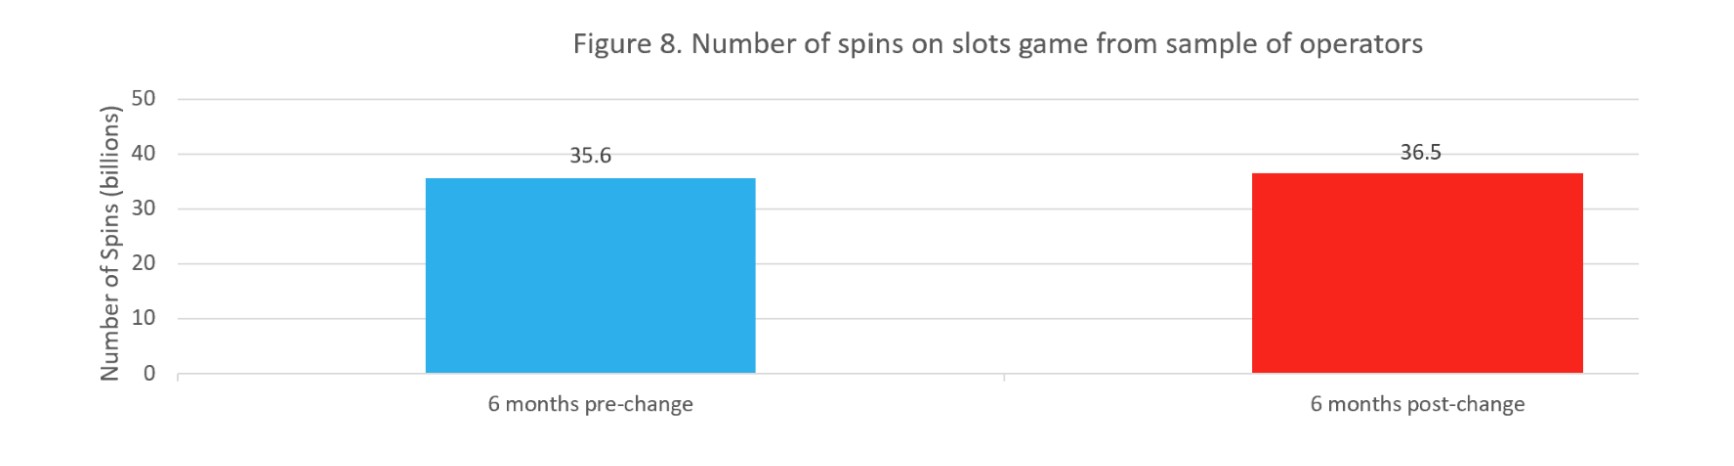 A bar chart showing the number of spins in online slots games before and after the changes to online slots games were introduced. Data from the chart is provided in the following table.